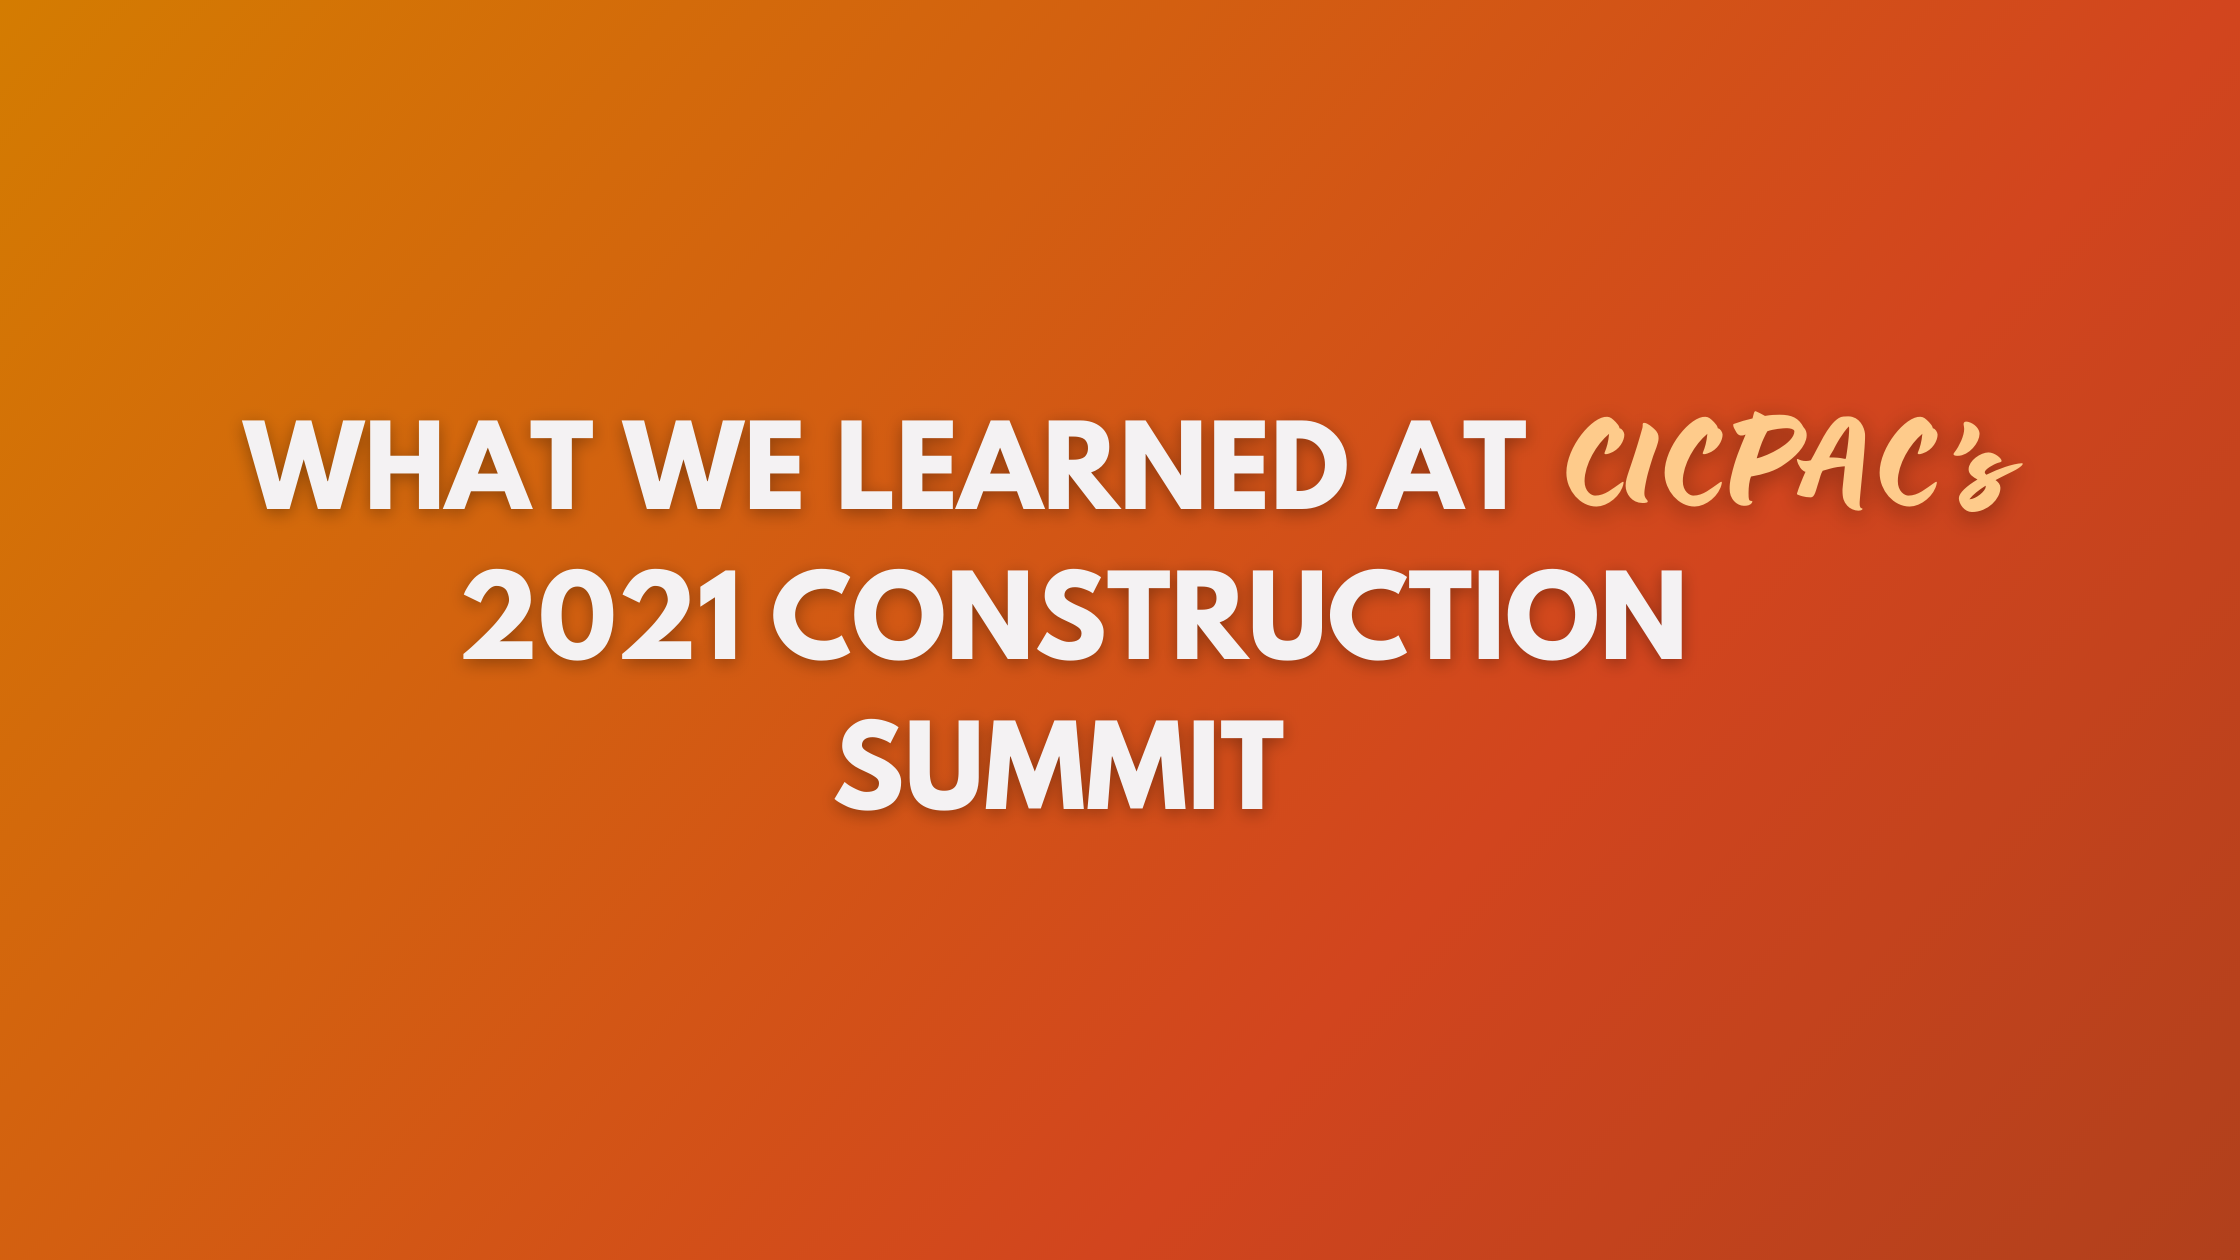 What We Learned at CICPAC's 2021 Construction Summit